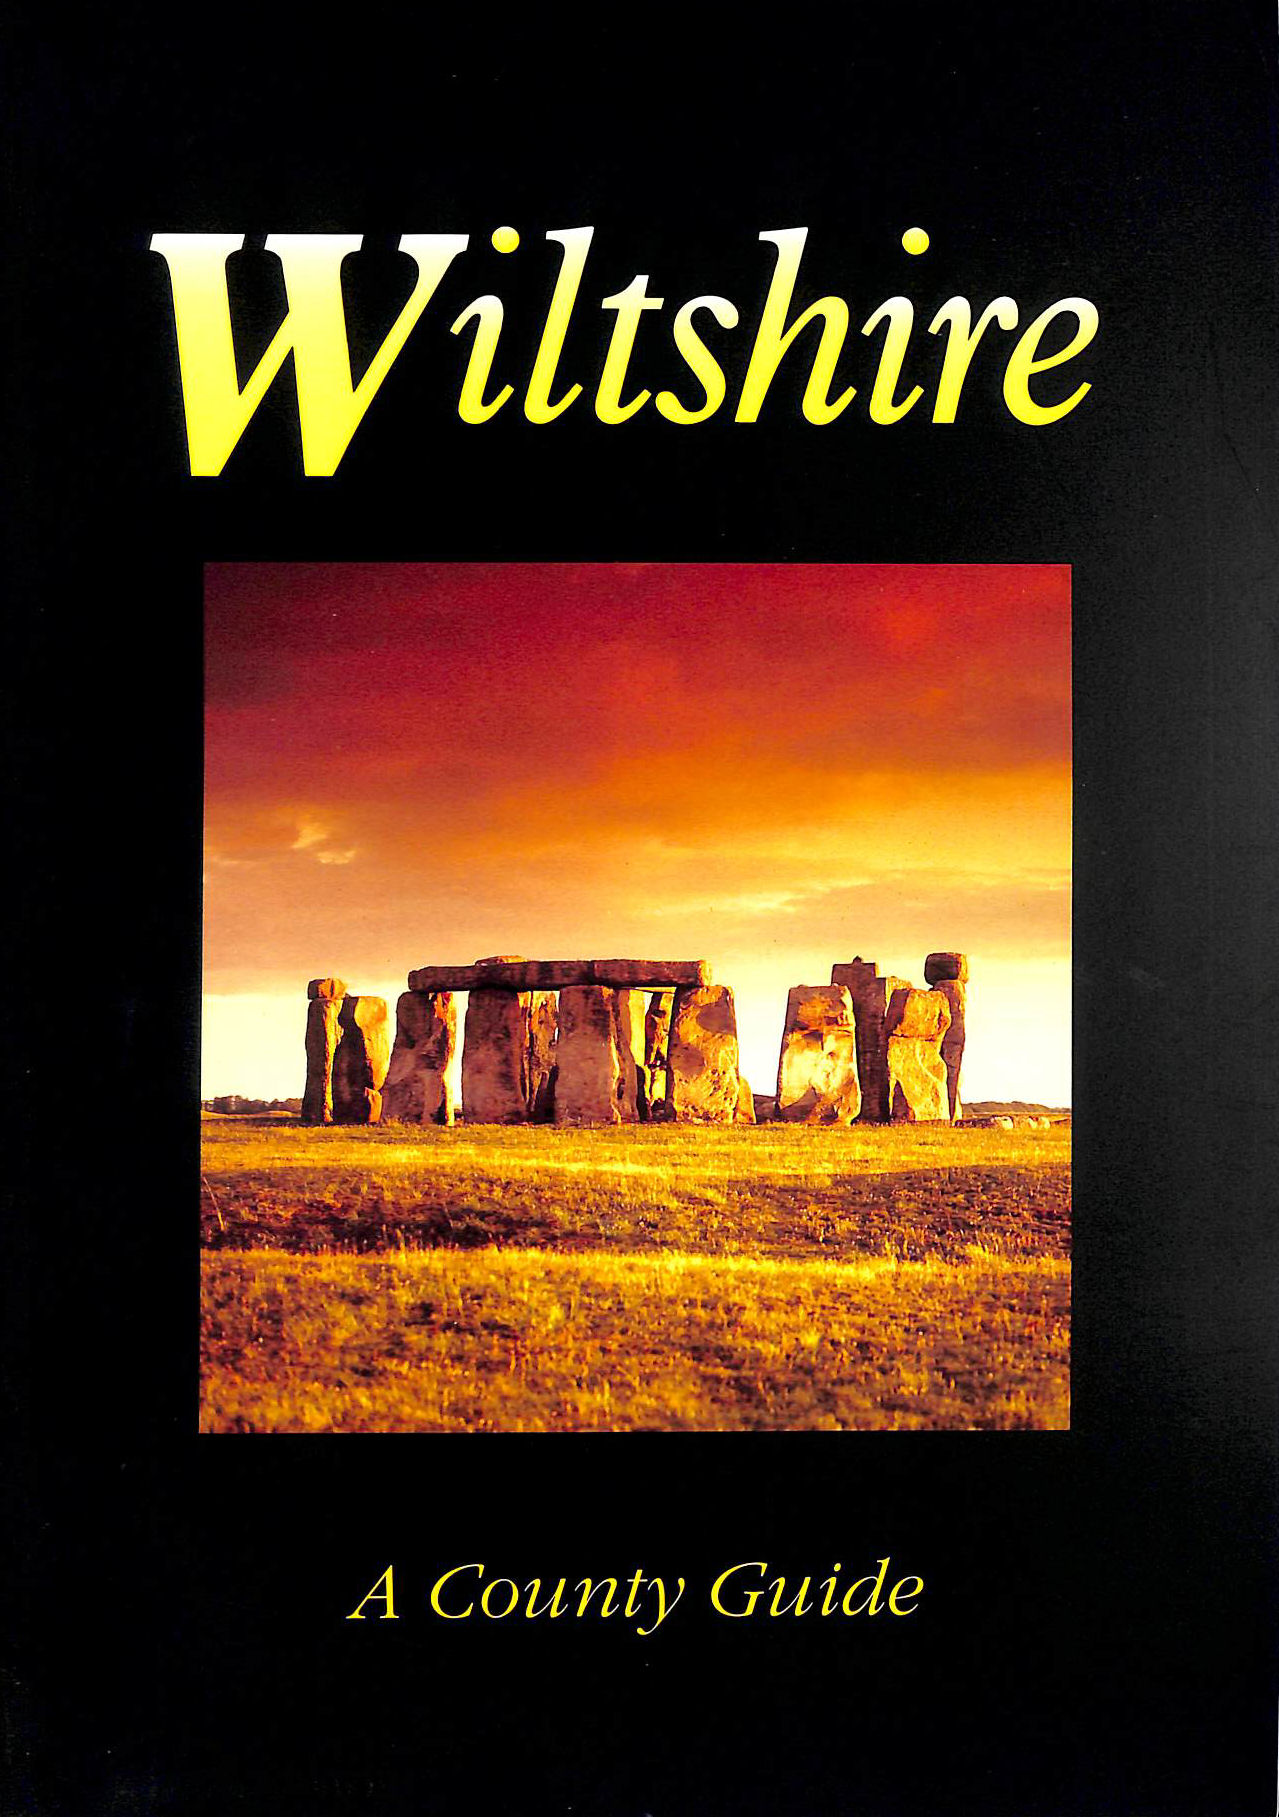 ANON - Wiltshire: A County Guide